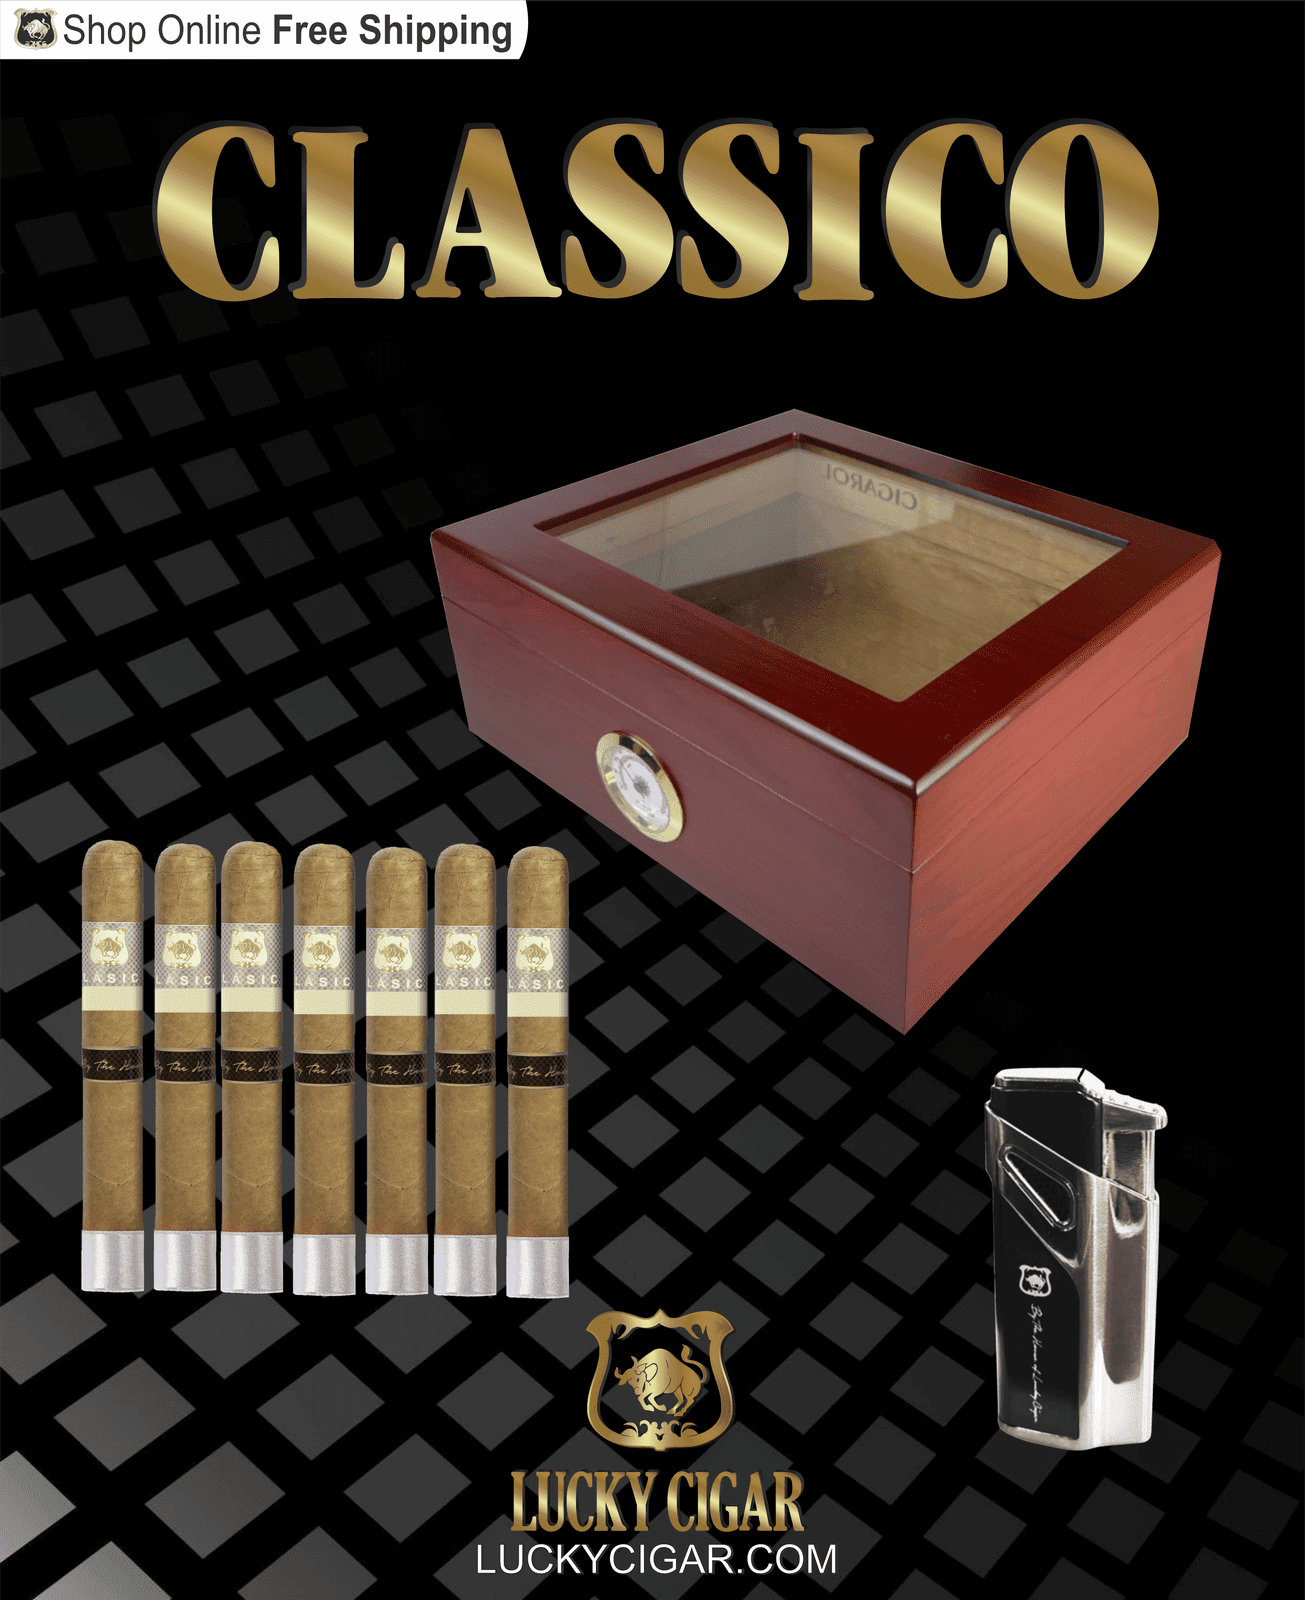 Lucky Cigar Sampler Sets: Set of 7 Classico Toro Cigars with Torch, Desk Humidor